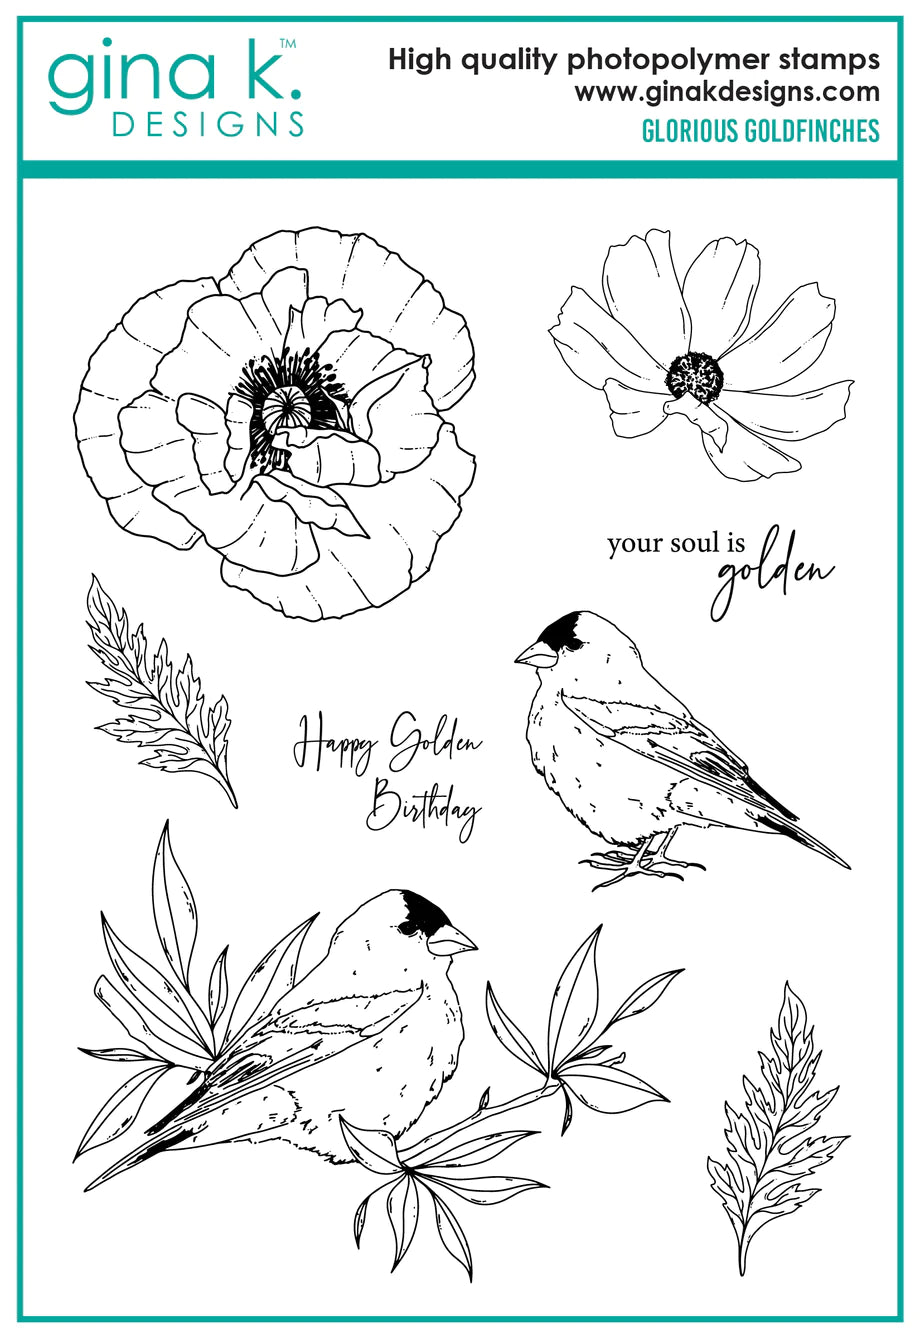 Gina K. Designs - Stamp & Die Set - Glorious Goldfinches. Glorious Goldfinches is a stamp set by Hannah Drapinski. This set is made of premium clear photopolymer and measures 6